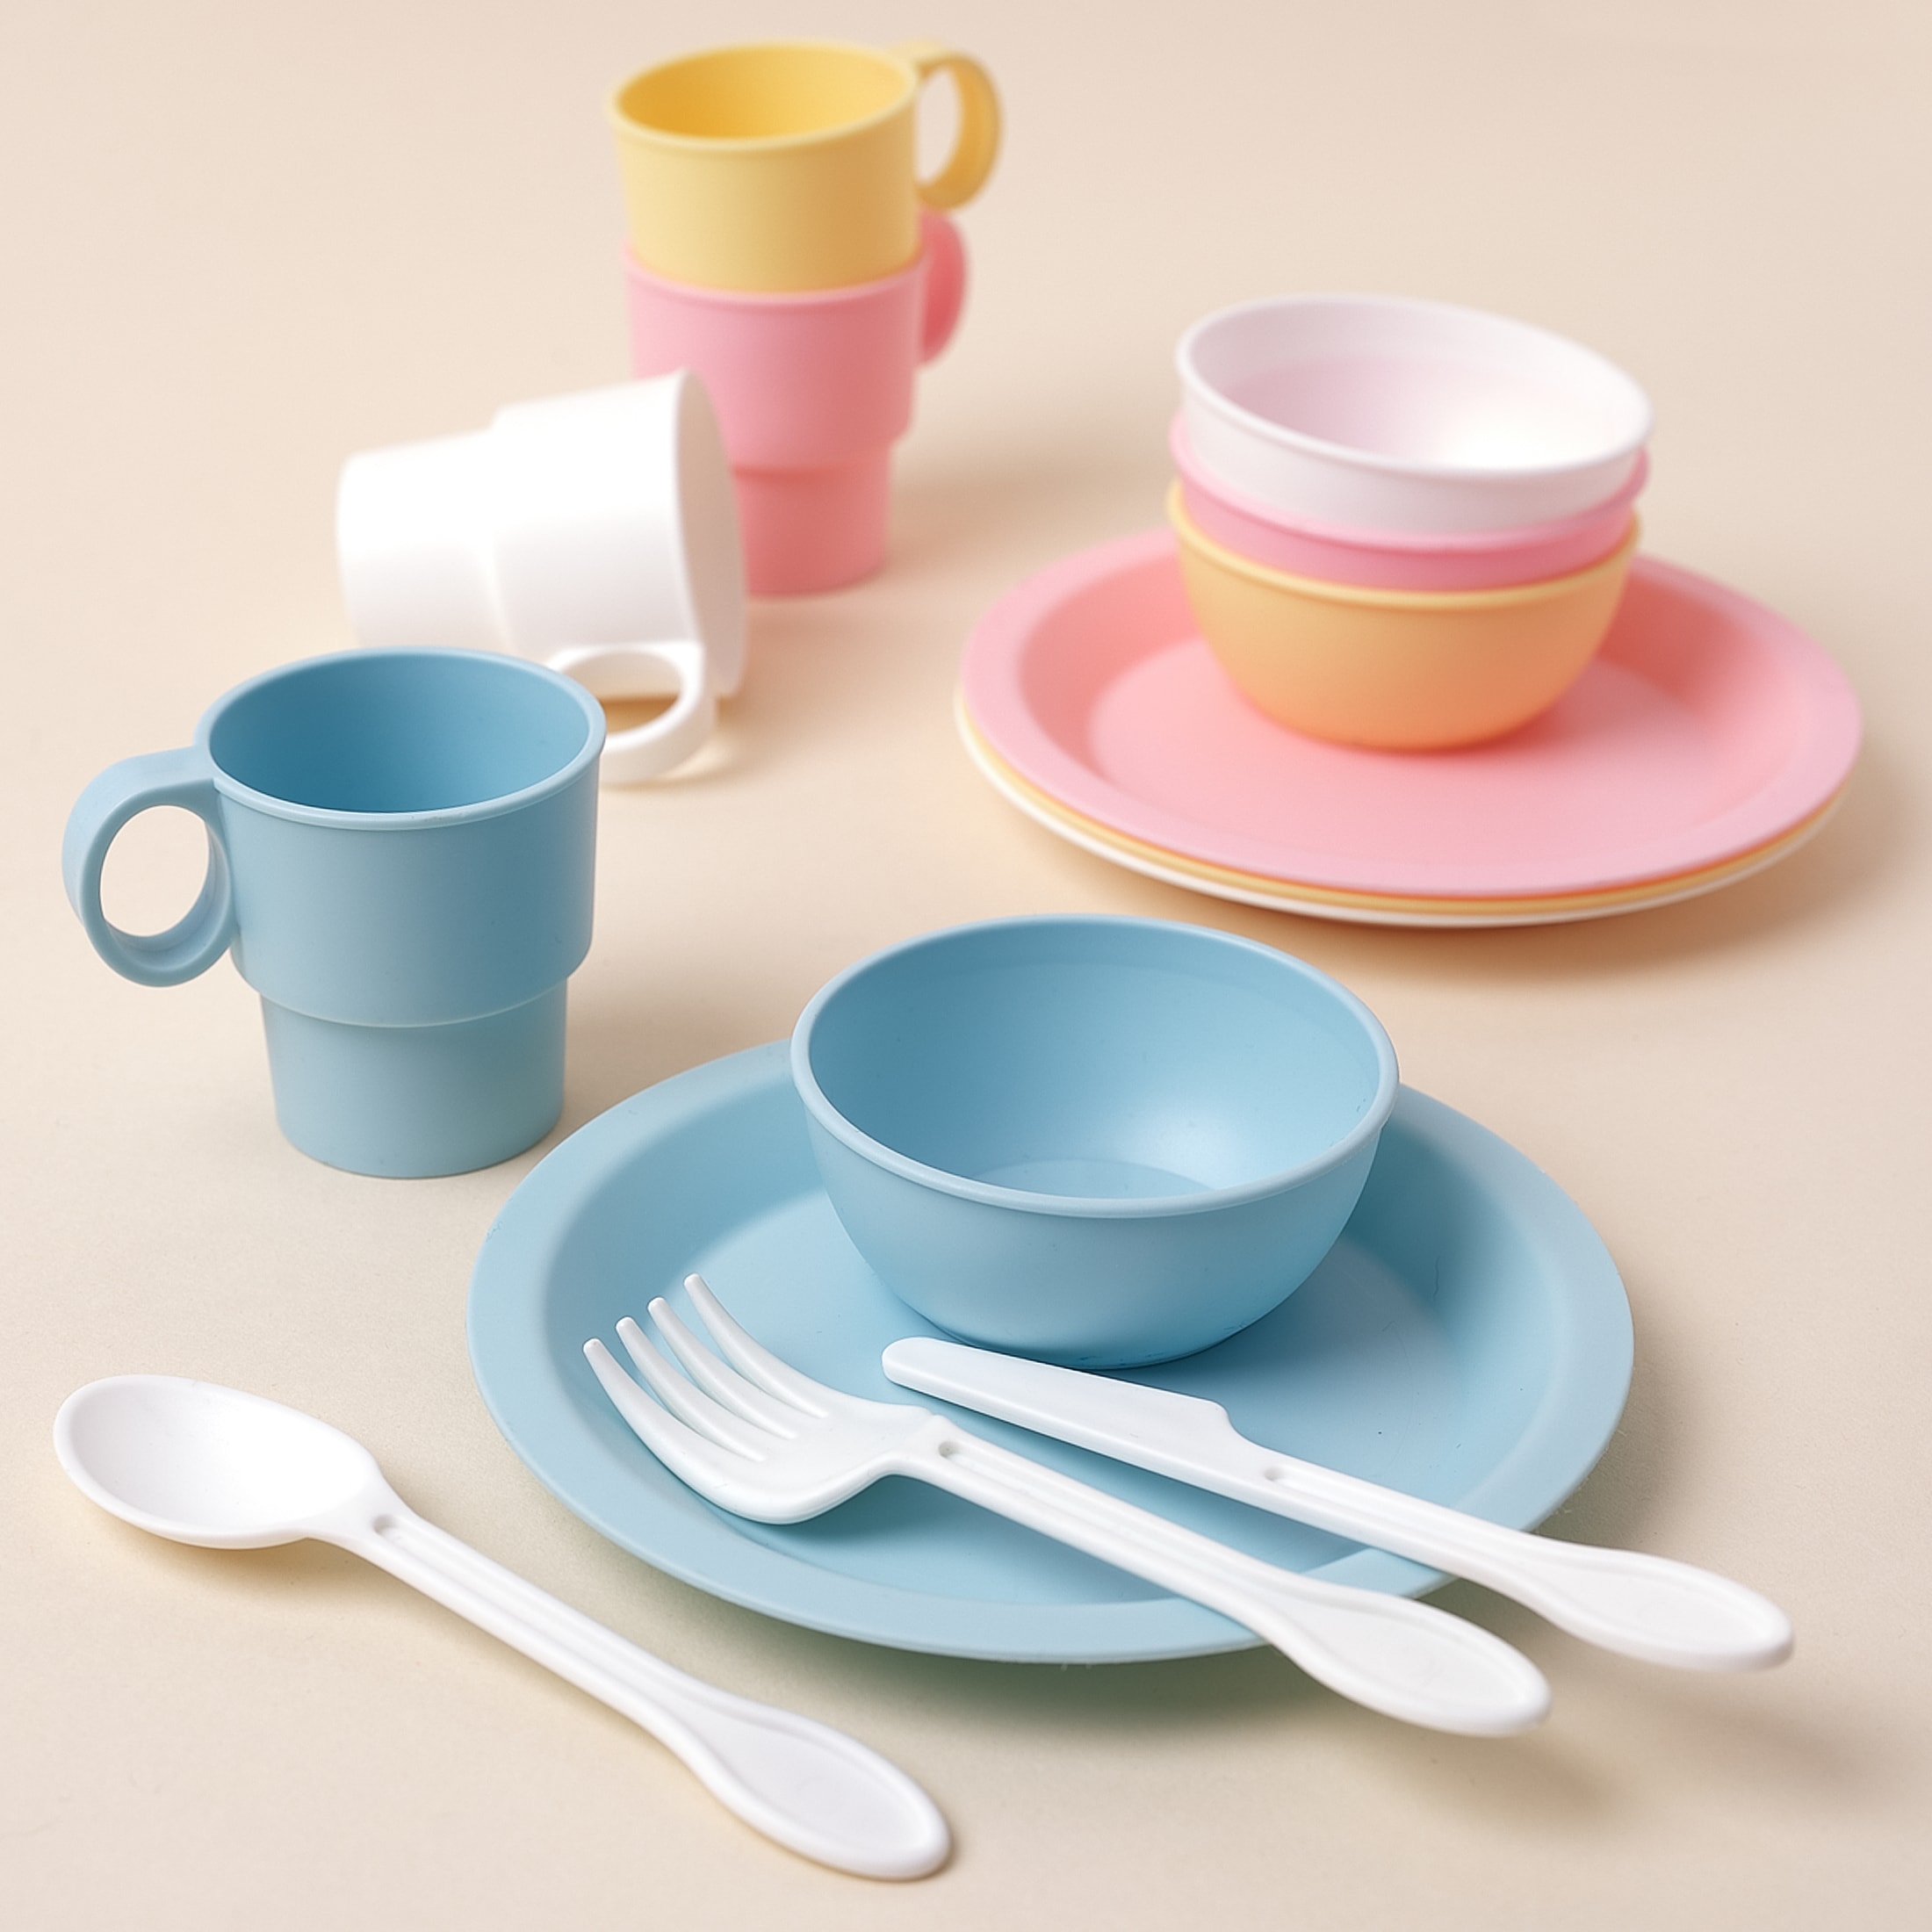 KidKraft 27-Piece Pastel Cookware Set, Plastic Dishes and Utensils for Play Kitchens - image 4 of 5